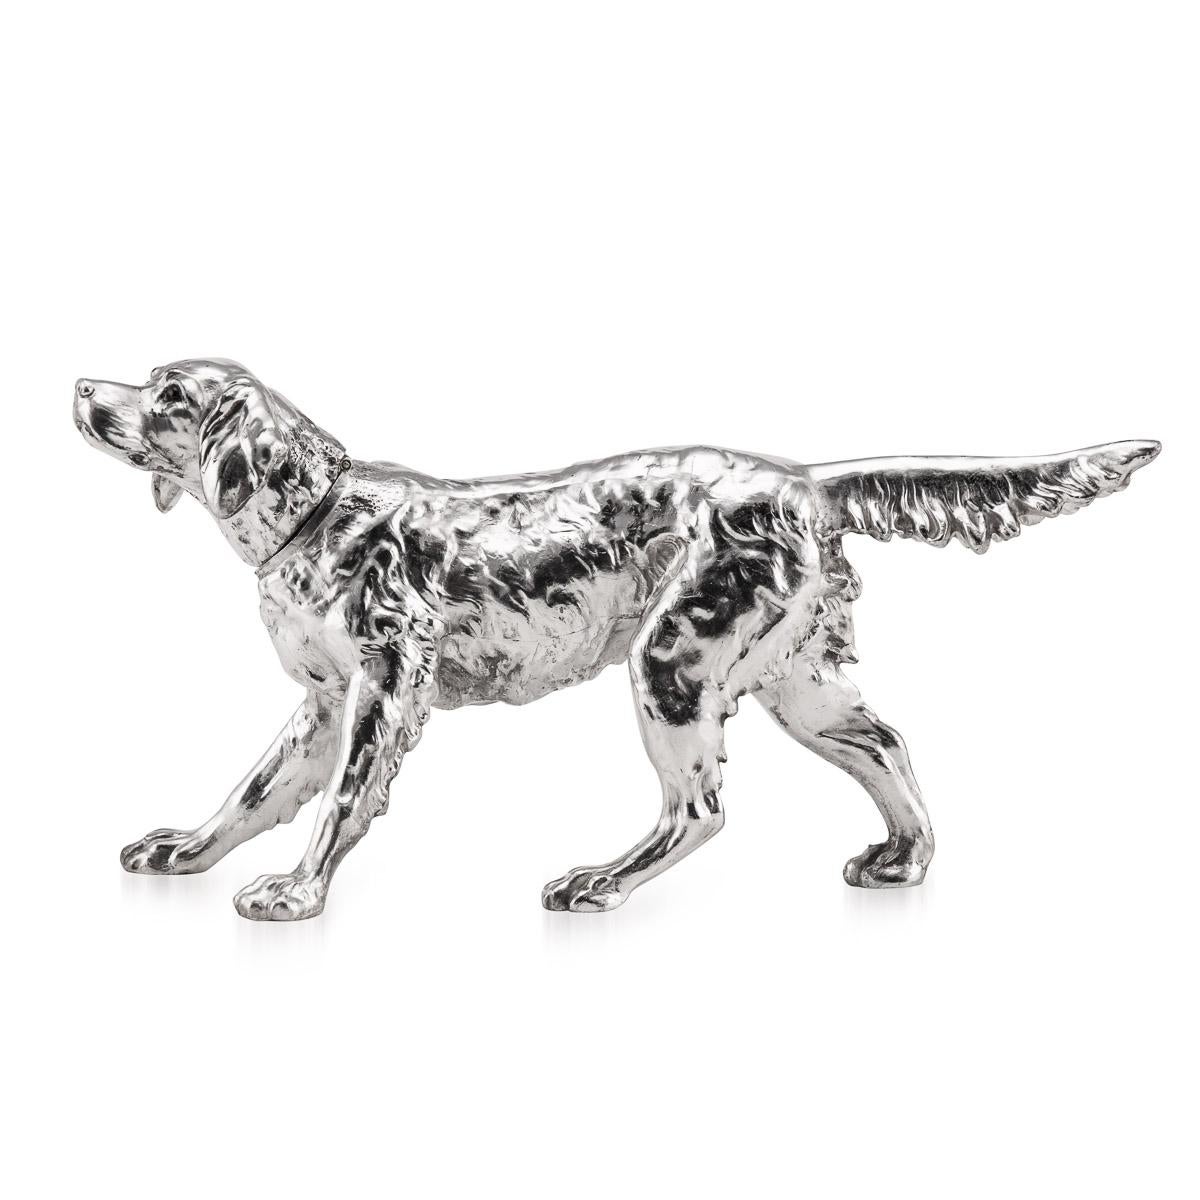 Stunning early-20th century large silver plated statue, beautifully and realistically modelled as a retriever, with a hinged head and set with glass eyes.

CONDITION
In great condition - no damage.

SIZE
Height: 19cm
Width: 35 x 12cm.